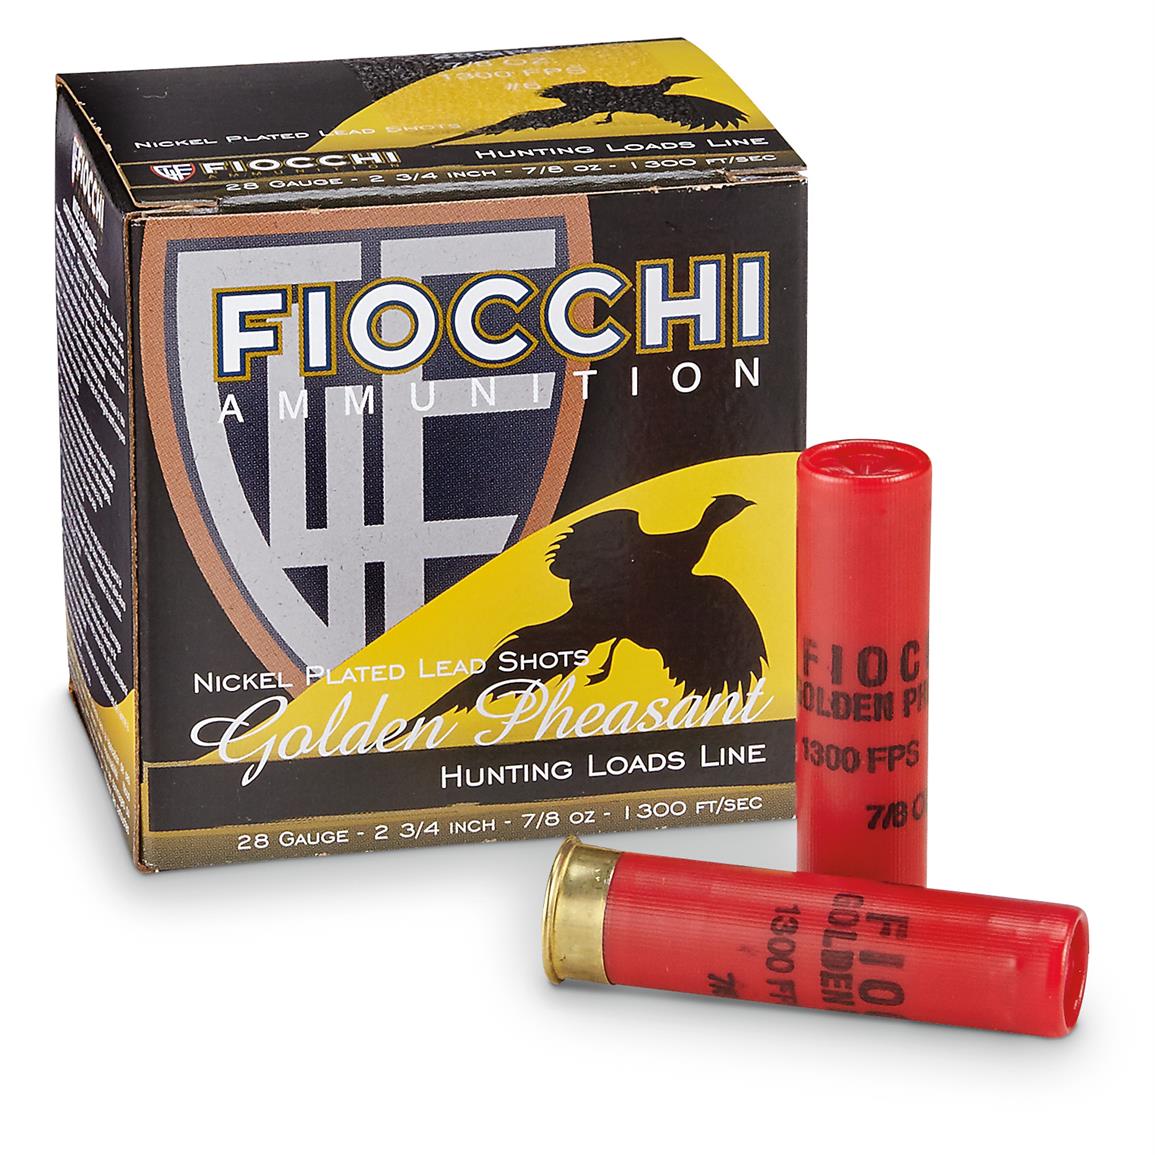 Fiocchi Golden Pheasant 12 Gauge Nickel-plated 2 3/4" 1 3/8-oz. Shells 25 rounds - $17.09